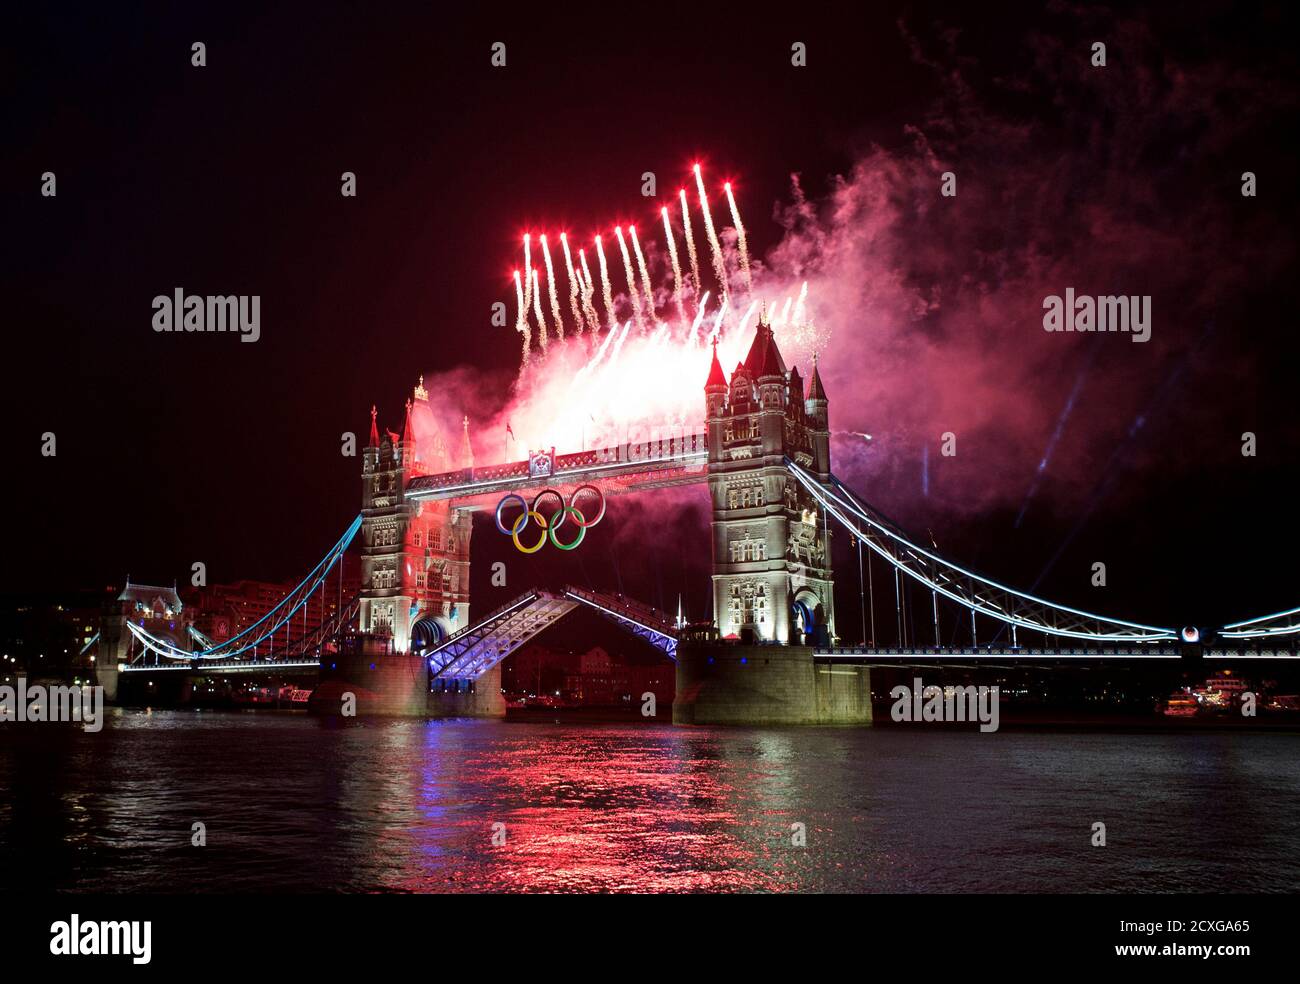 Fireworks explode over the London Tower Bridge during the opening ceremony of London 2012 Olympic Games July 27, 2012. REUTERS/Mark Blinch (BRITAIN - Tags: SPORT OLYMPICS) Stock Photo